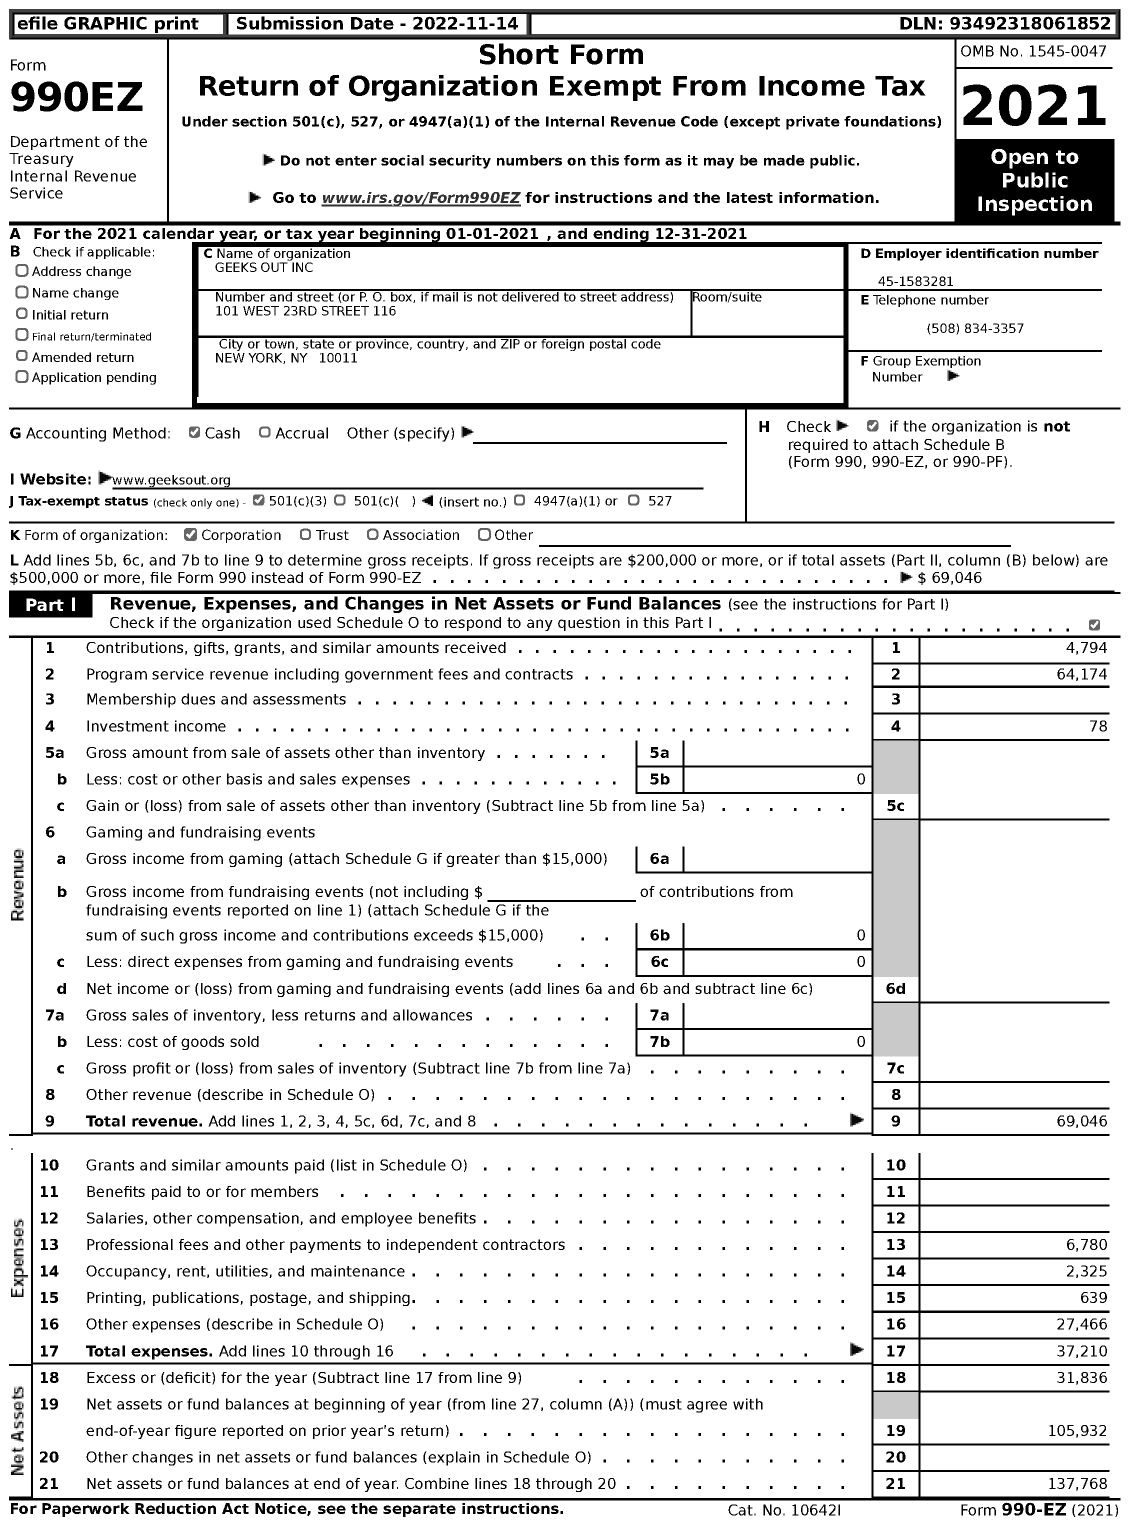 Image of first page of 2021 Form 990EZ for Geeks Out